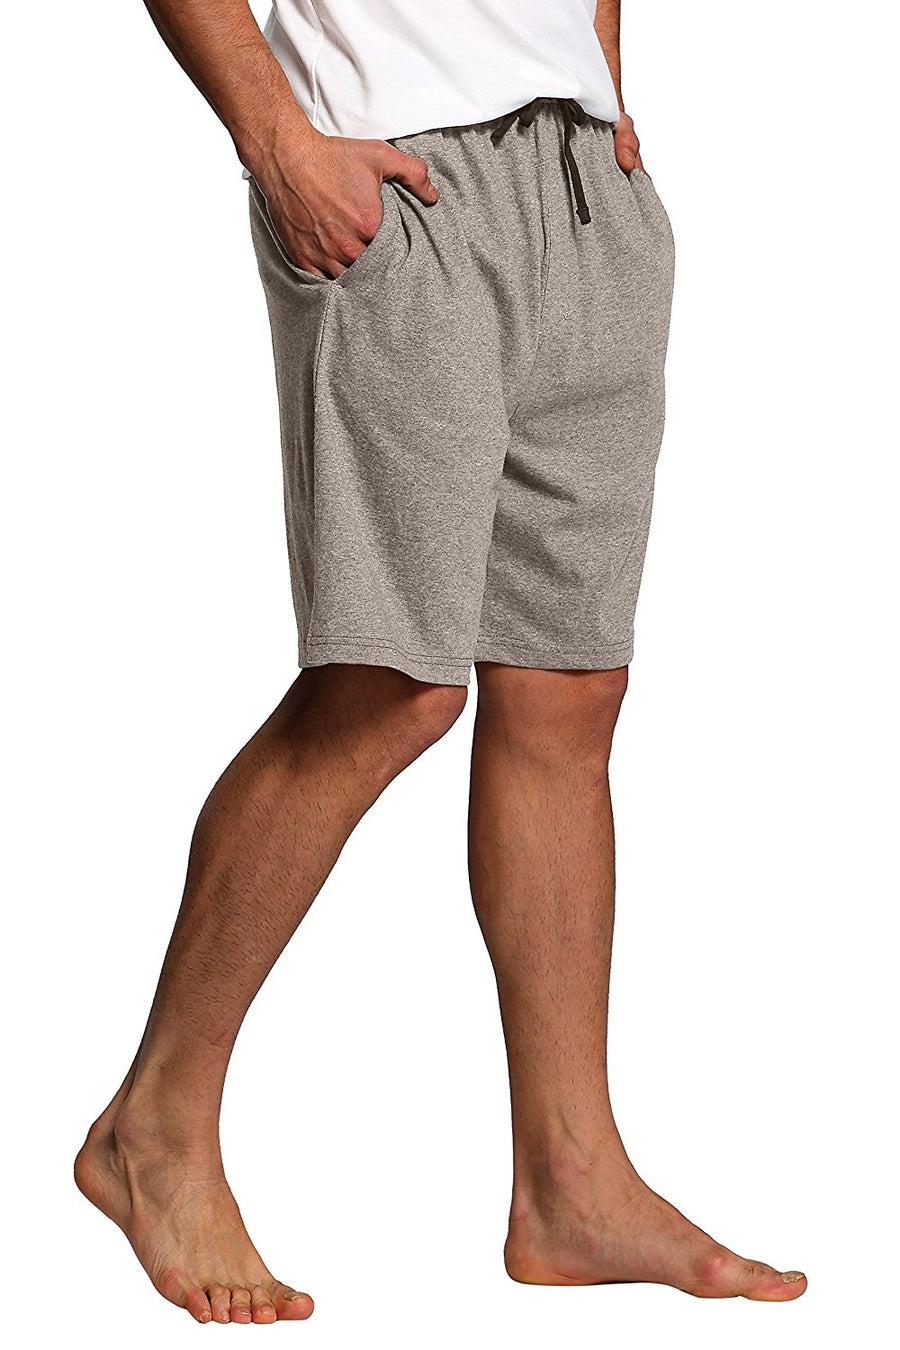 Cotton:On super soft sleep shorts in gray